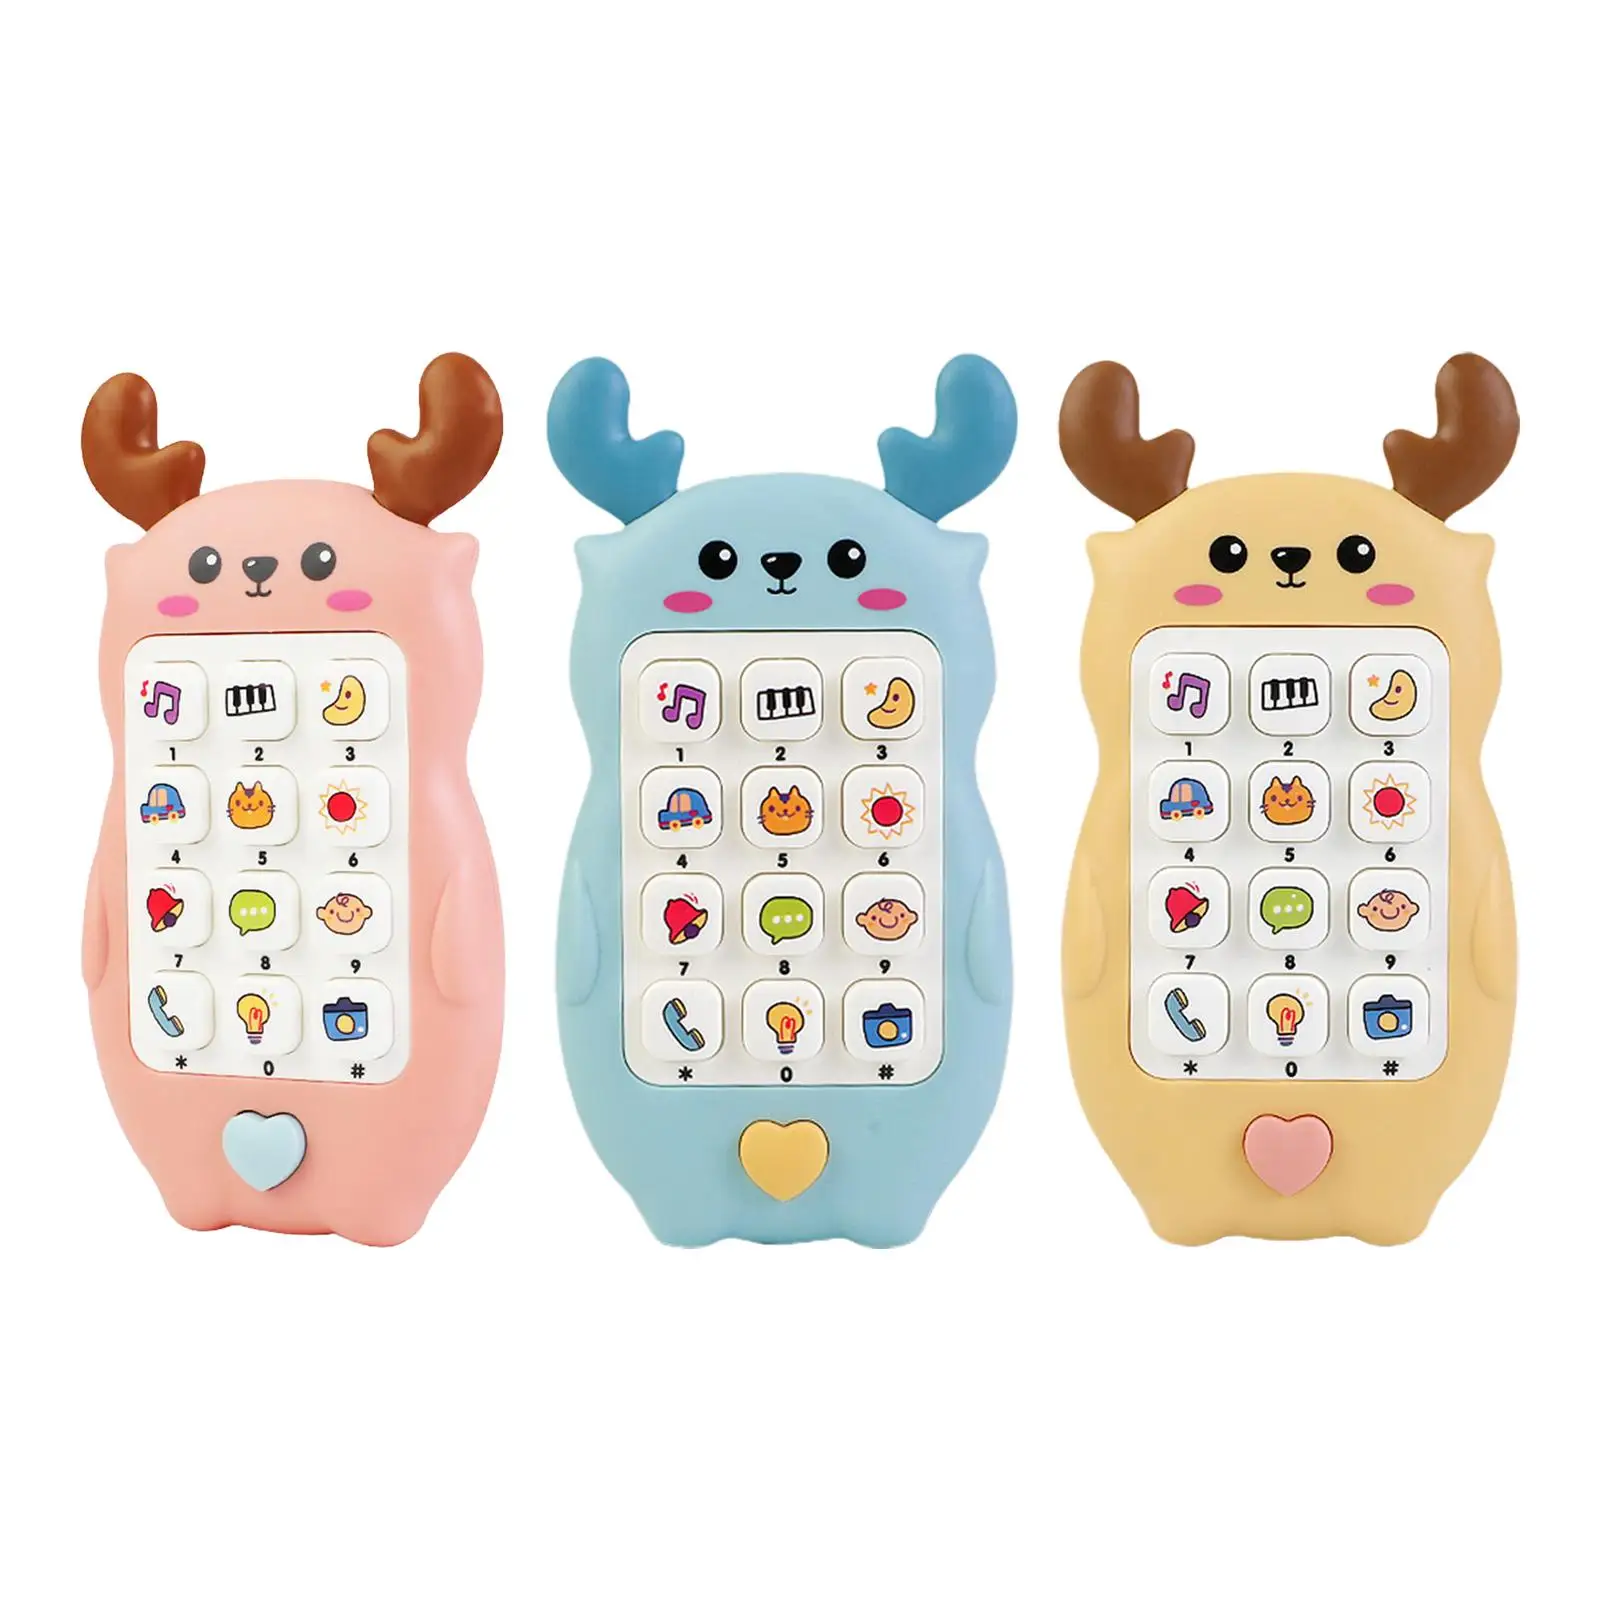 

Baby Musical Phone Toys Preschool Learning Toy with Lights Various Musics Sounds Baby Interactive Phone Toys for Aged 18Months+